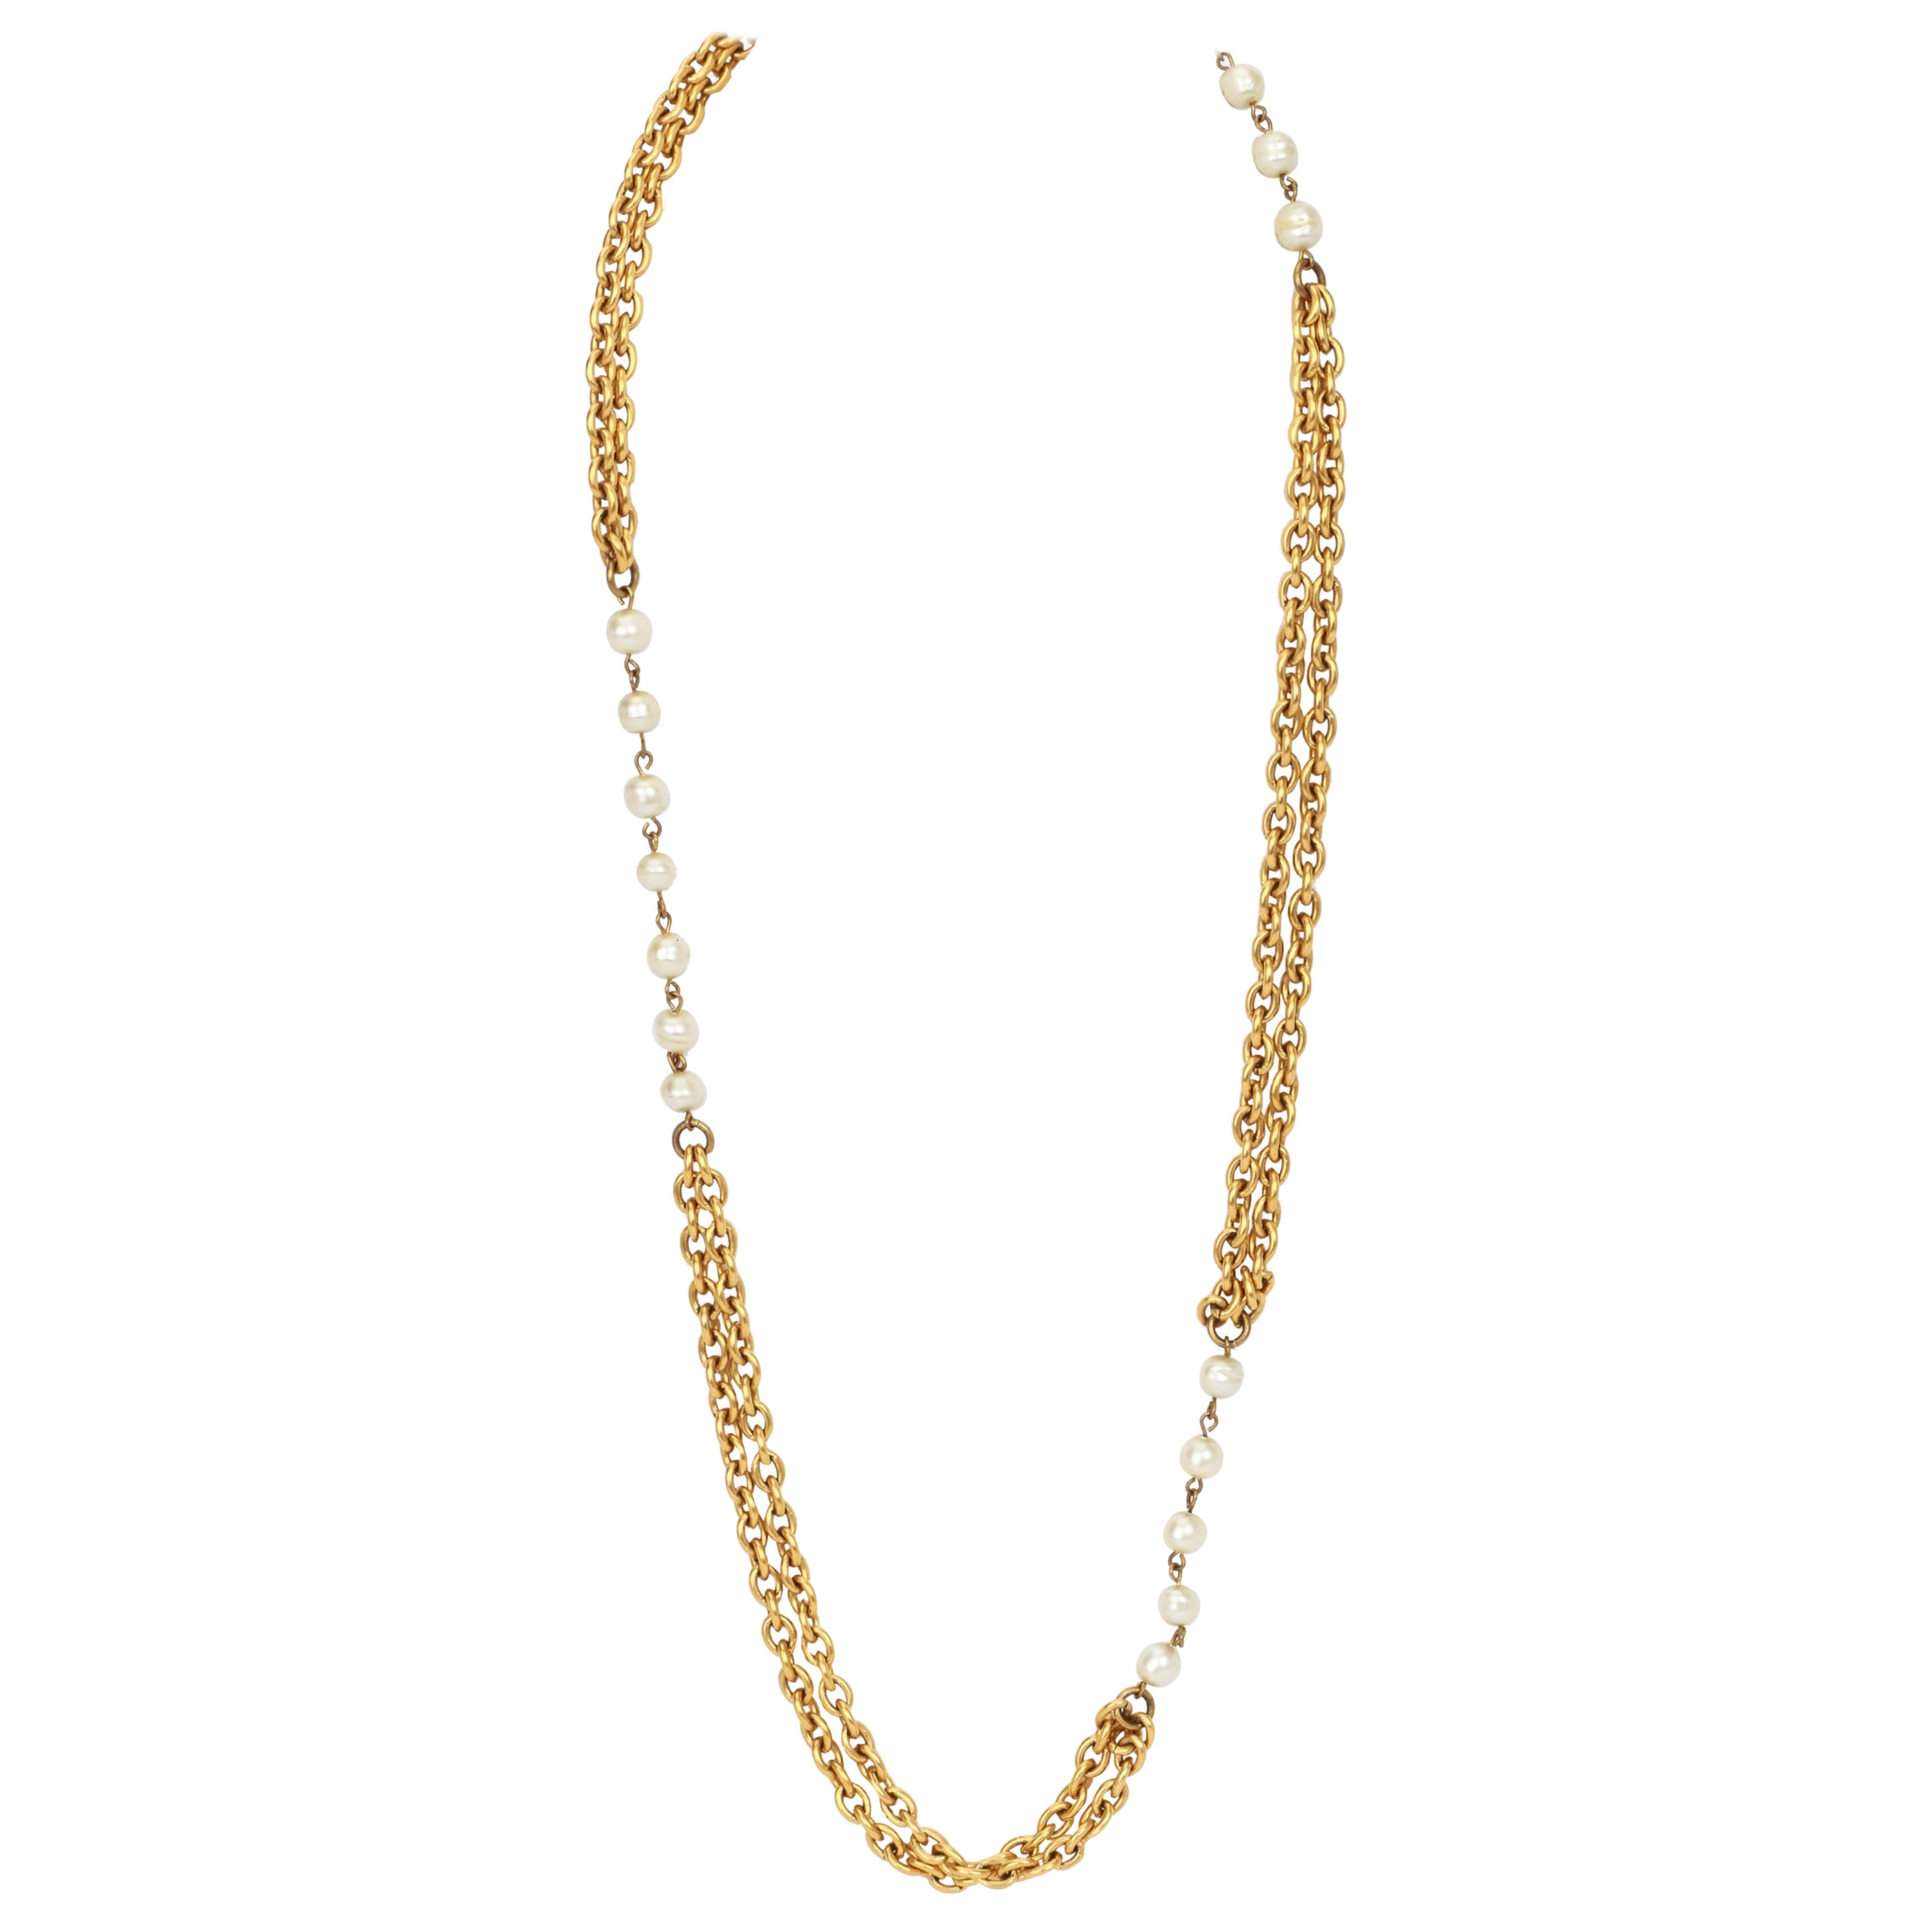 Vintage 1990's Chanel Sautoir Gold Pearl Chain Necklace For Sale